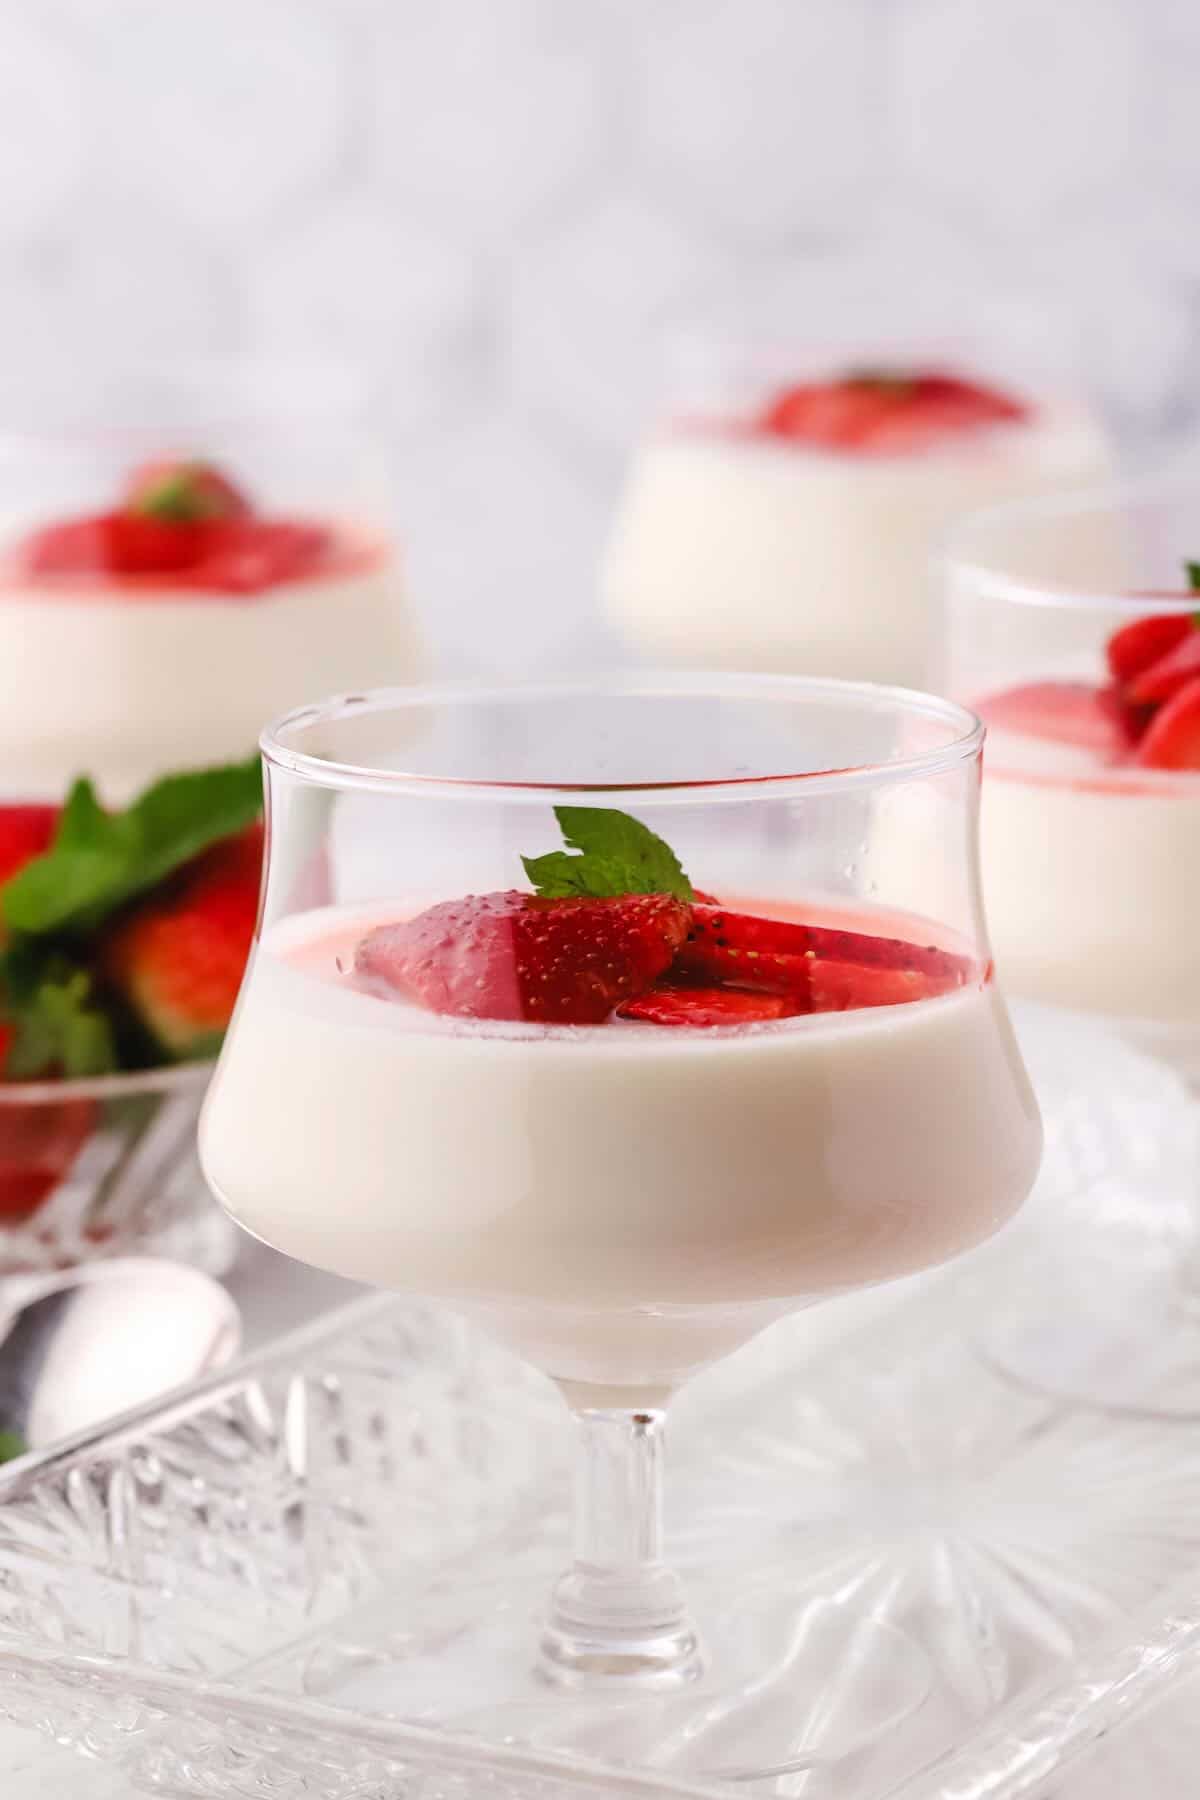 A clear glass dish full of panna cotta and sliced strawberries.